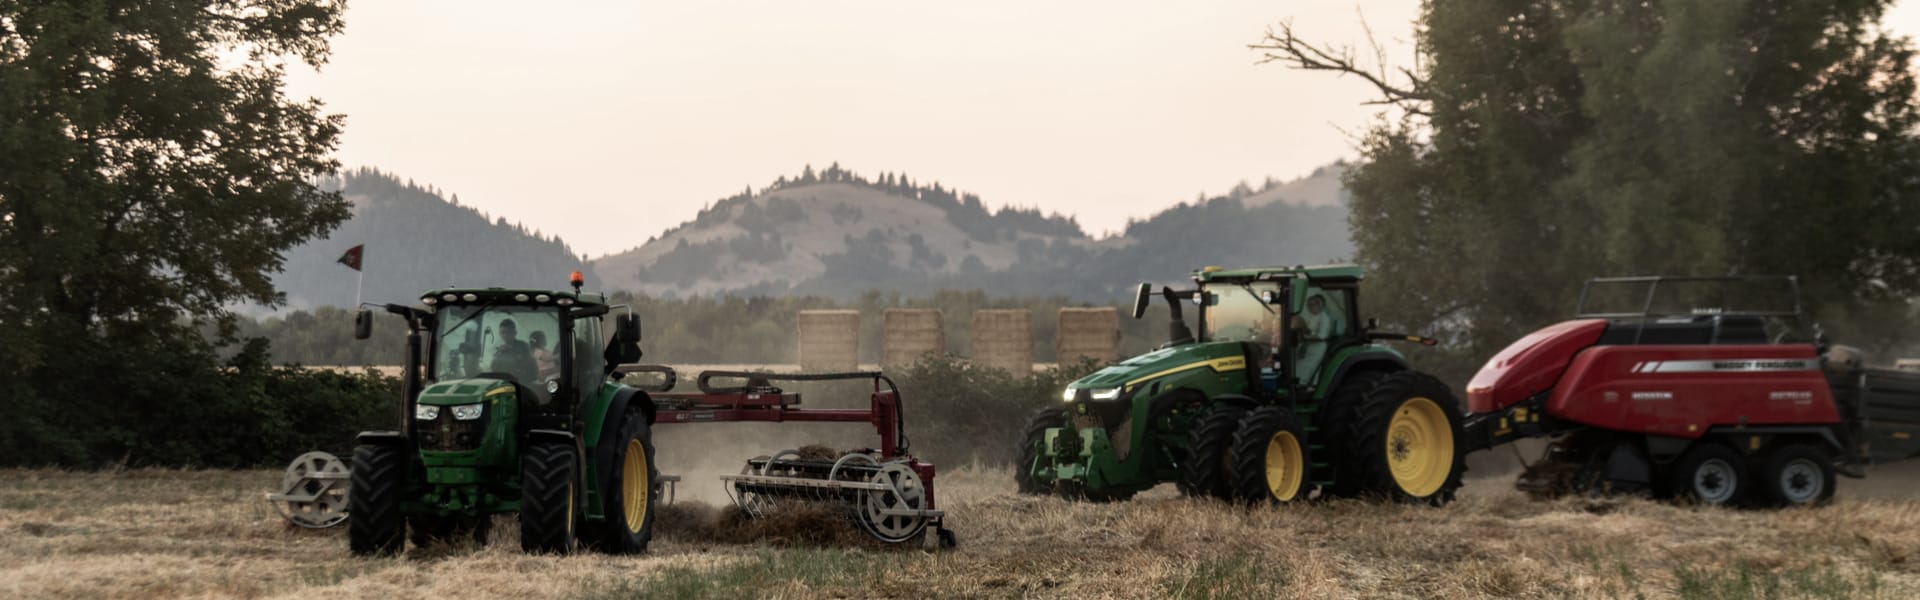 tractors in field for my account page